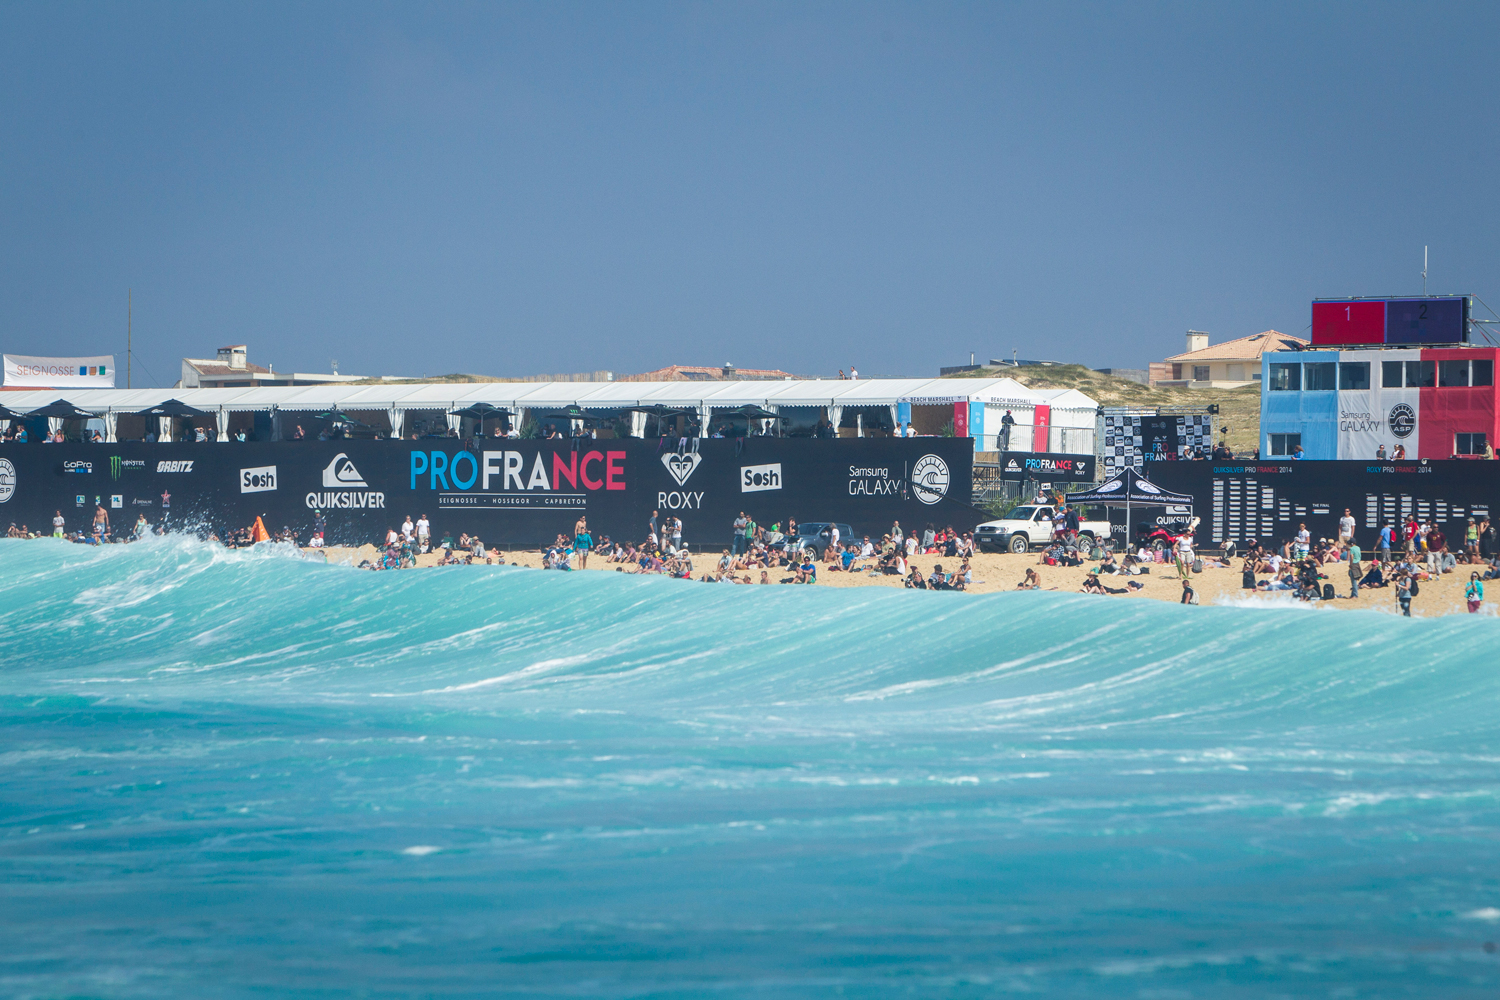 Join the  F U N  at #ROXYpro France